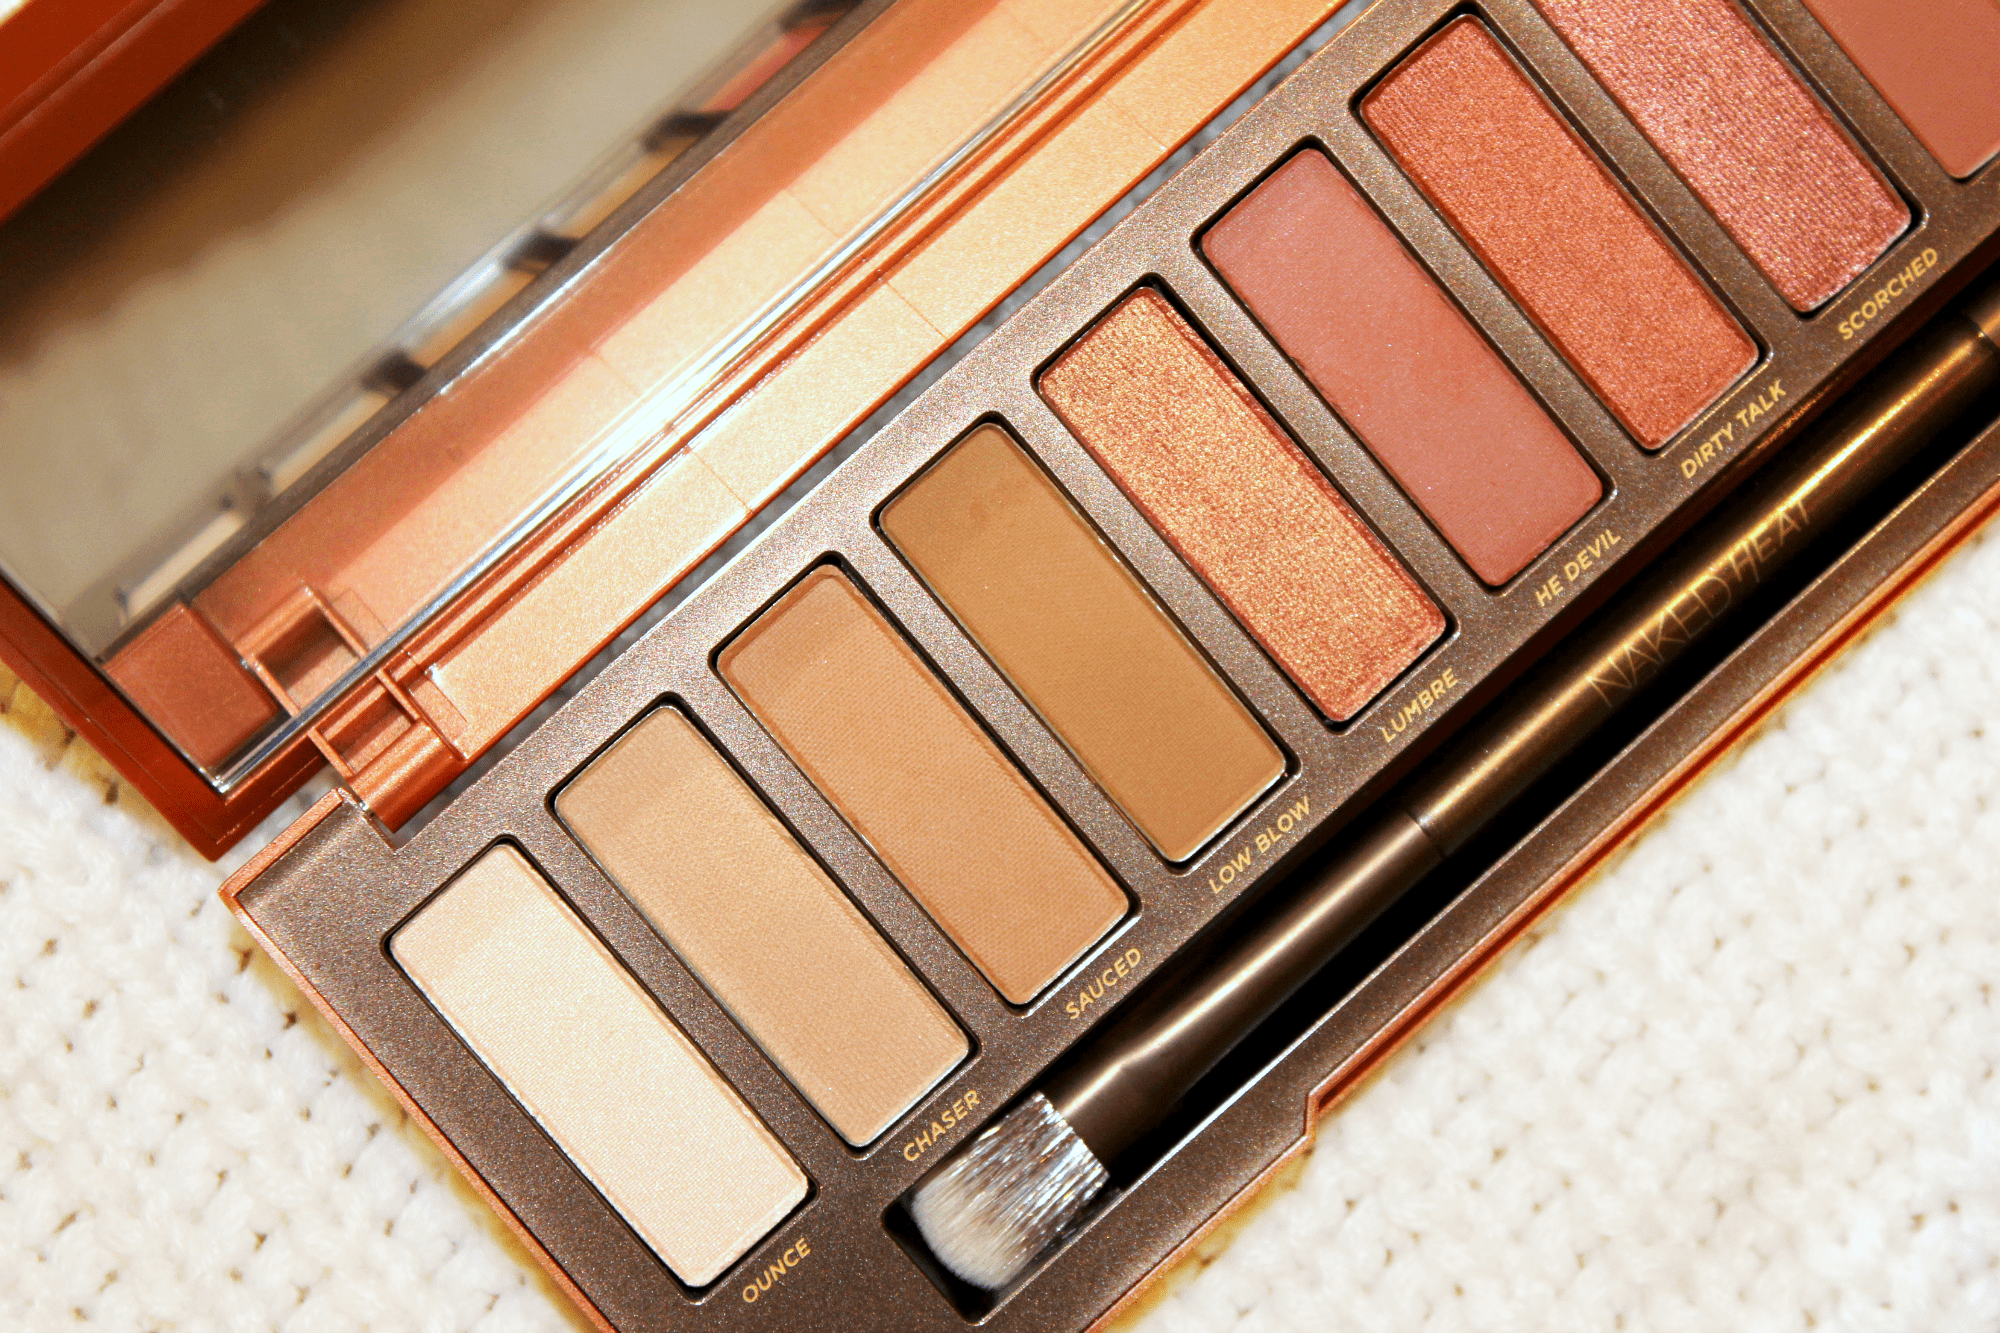 Urban Decay Naked Heat Palette Review // Talonted Lex